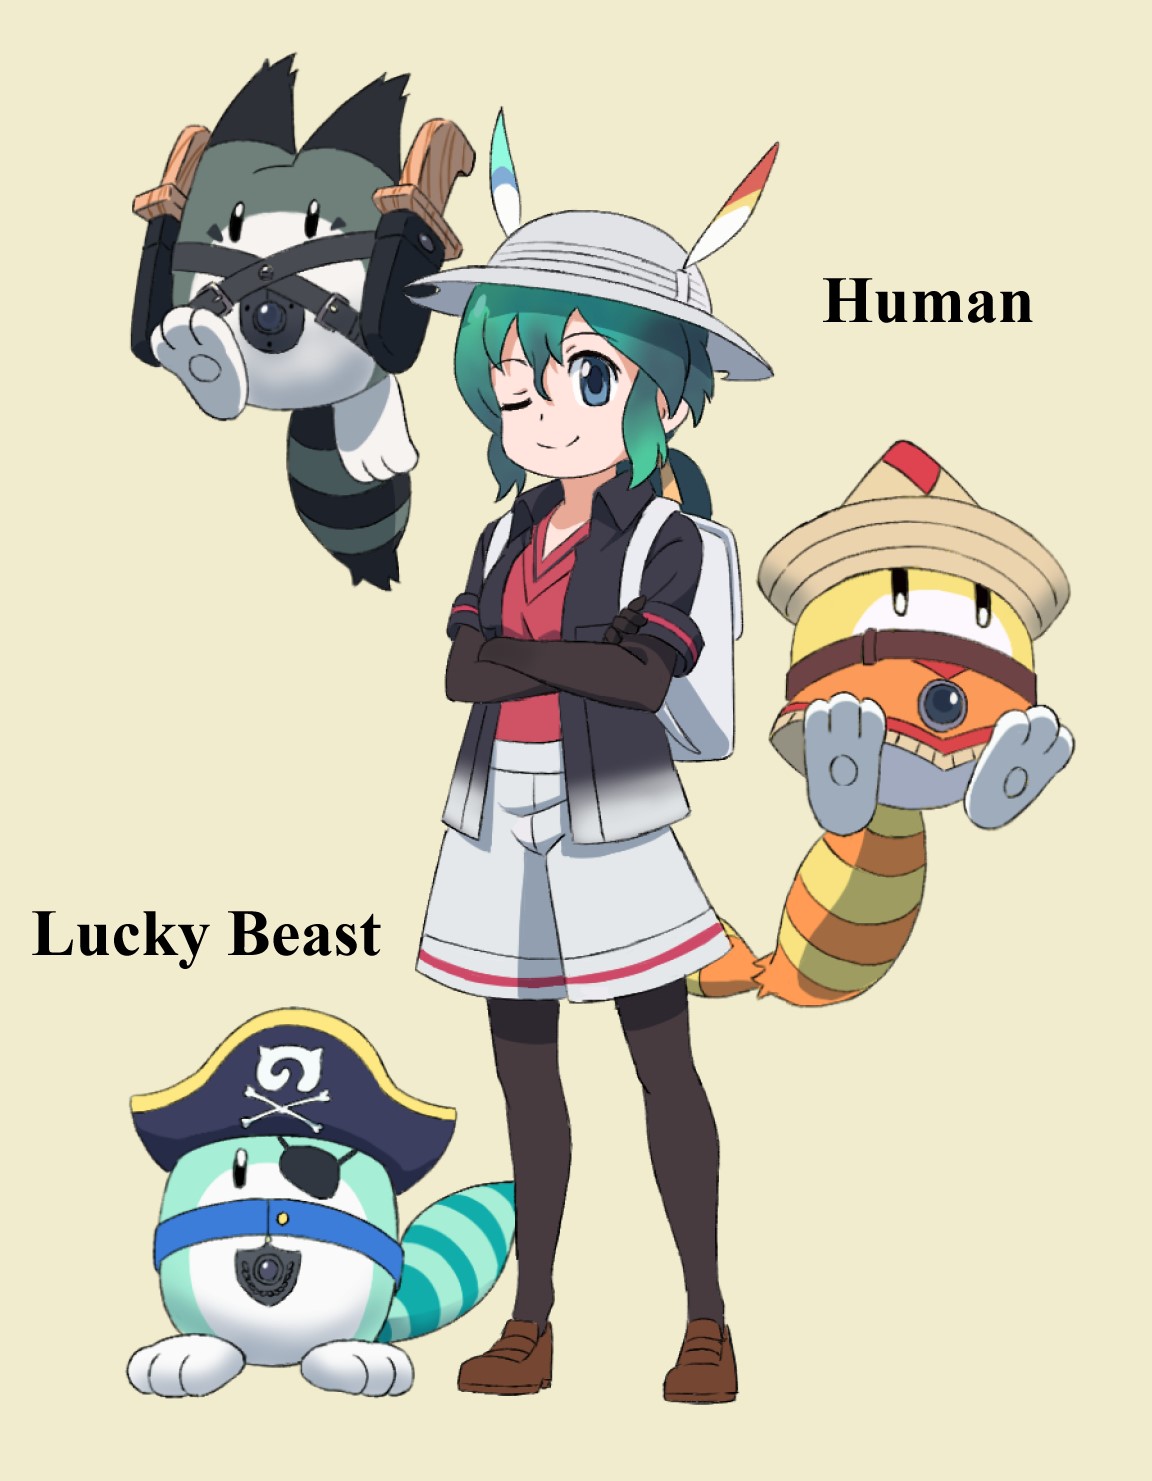 1girl ;) backpack bag bangs beige_background black_blouse black_gloves black_legwear blouse blue_eyes brown_footwear character_name collared_blouse commentary_request crossed_arms elbow_gloves english_text eyepatch gloves green_hair grey_headwear grey_shorts hat hat_feather helmet highres japari_symbol kaban_(kemono_friends) kemono_friends legwear_under_shorts loafers low_ponytail lucky_beast_(kemono_friends) older one_eye_closed open_blouse open_clothes pantyhose pirate_hat pith_helmet red_shirt shirt shoes shorts sidelocks simple_background smile v-neck yamaguchi_yoshimi